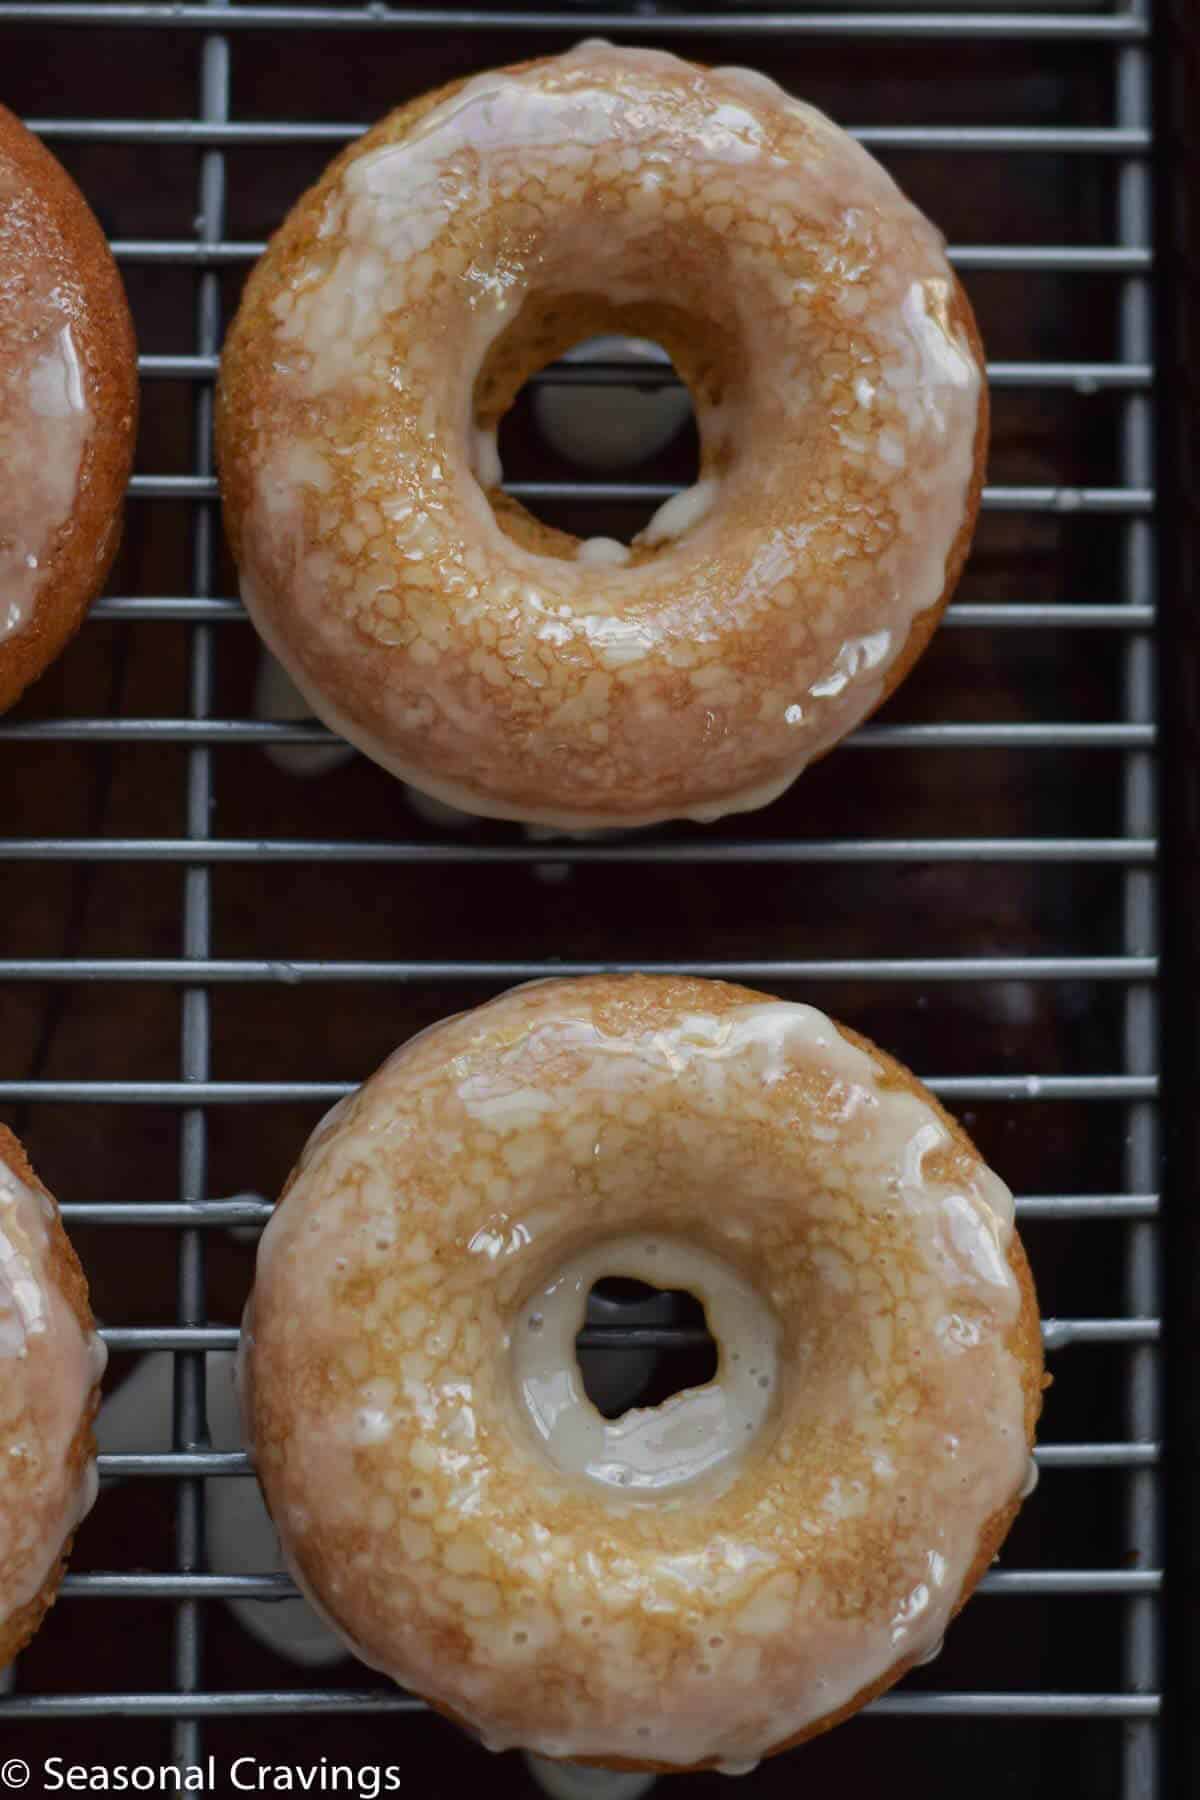  Gluten Free Apple Cider Doughnuts on a rack with a sweet glaze